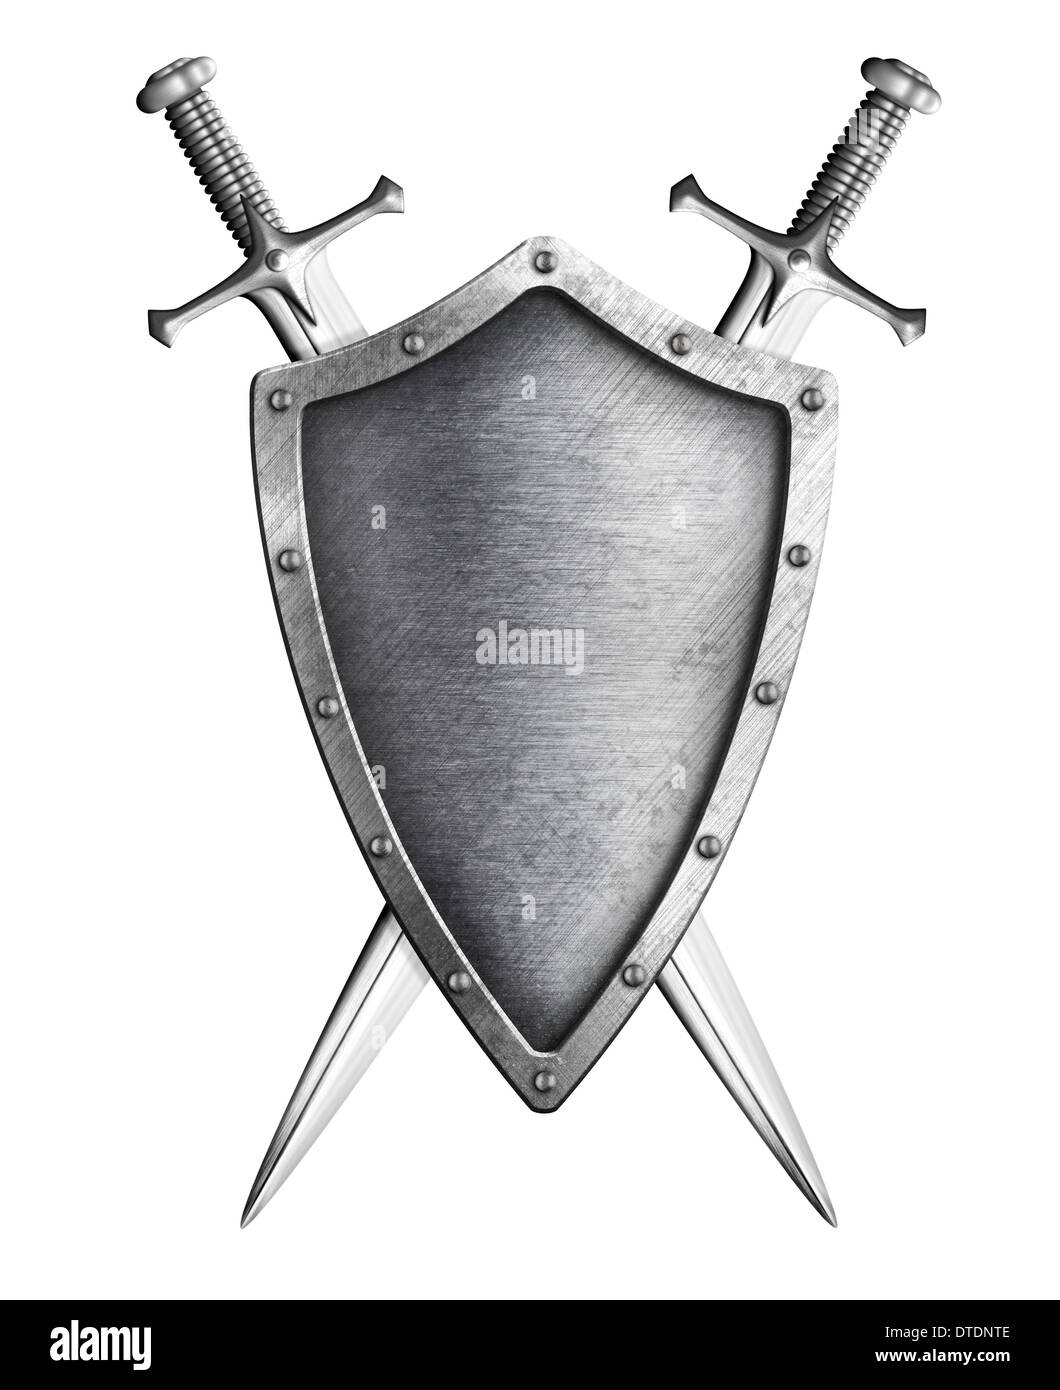 520+ Metal Shield With Crossed Swords Stock Photos, Pictures & Royalty-Free  Images - iStock